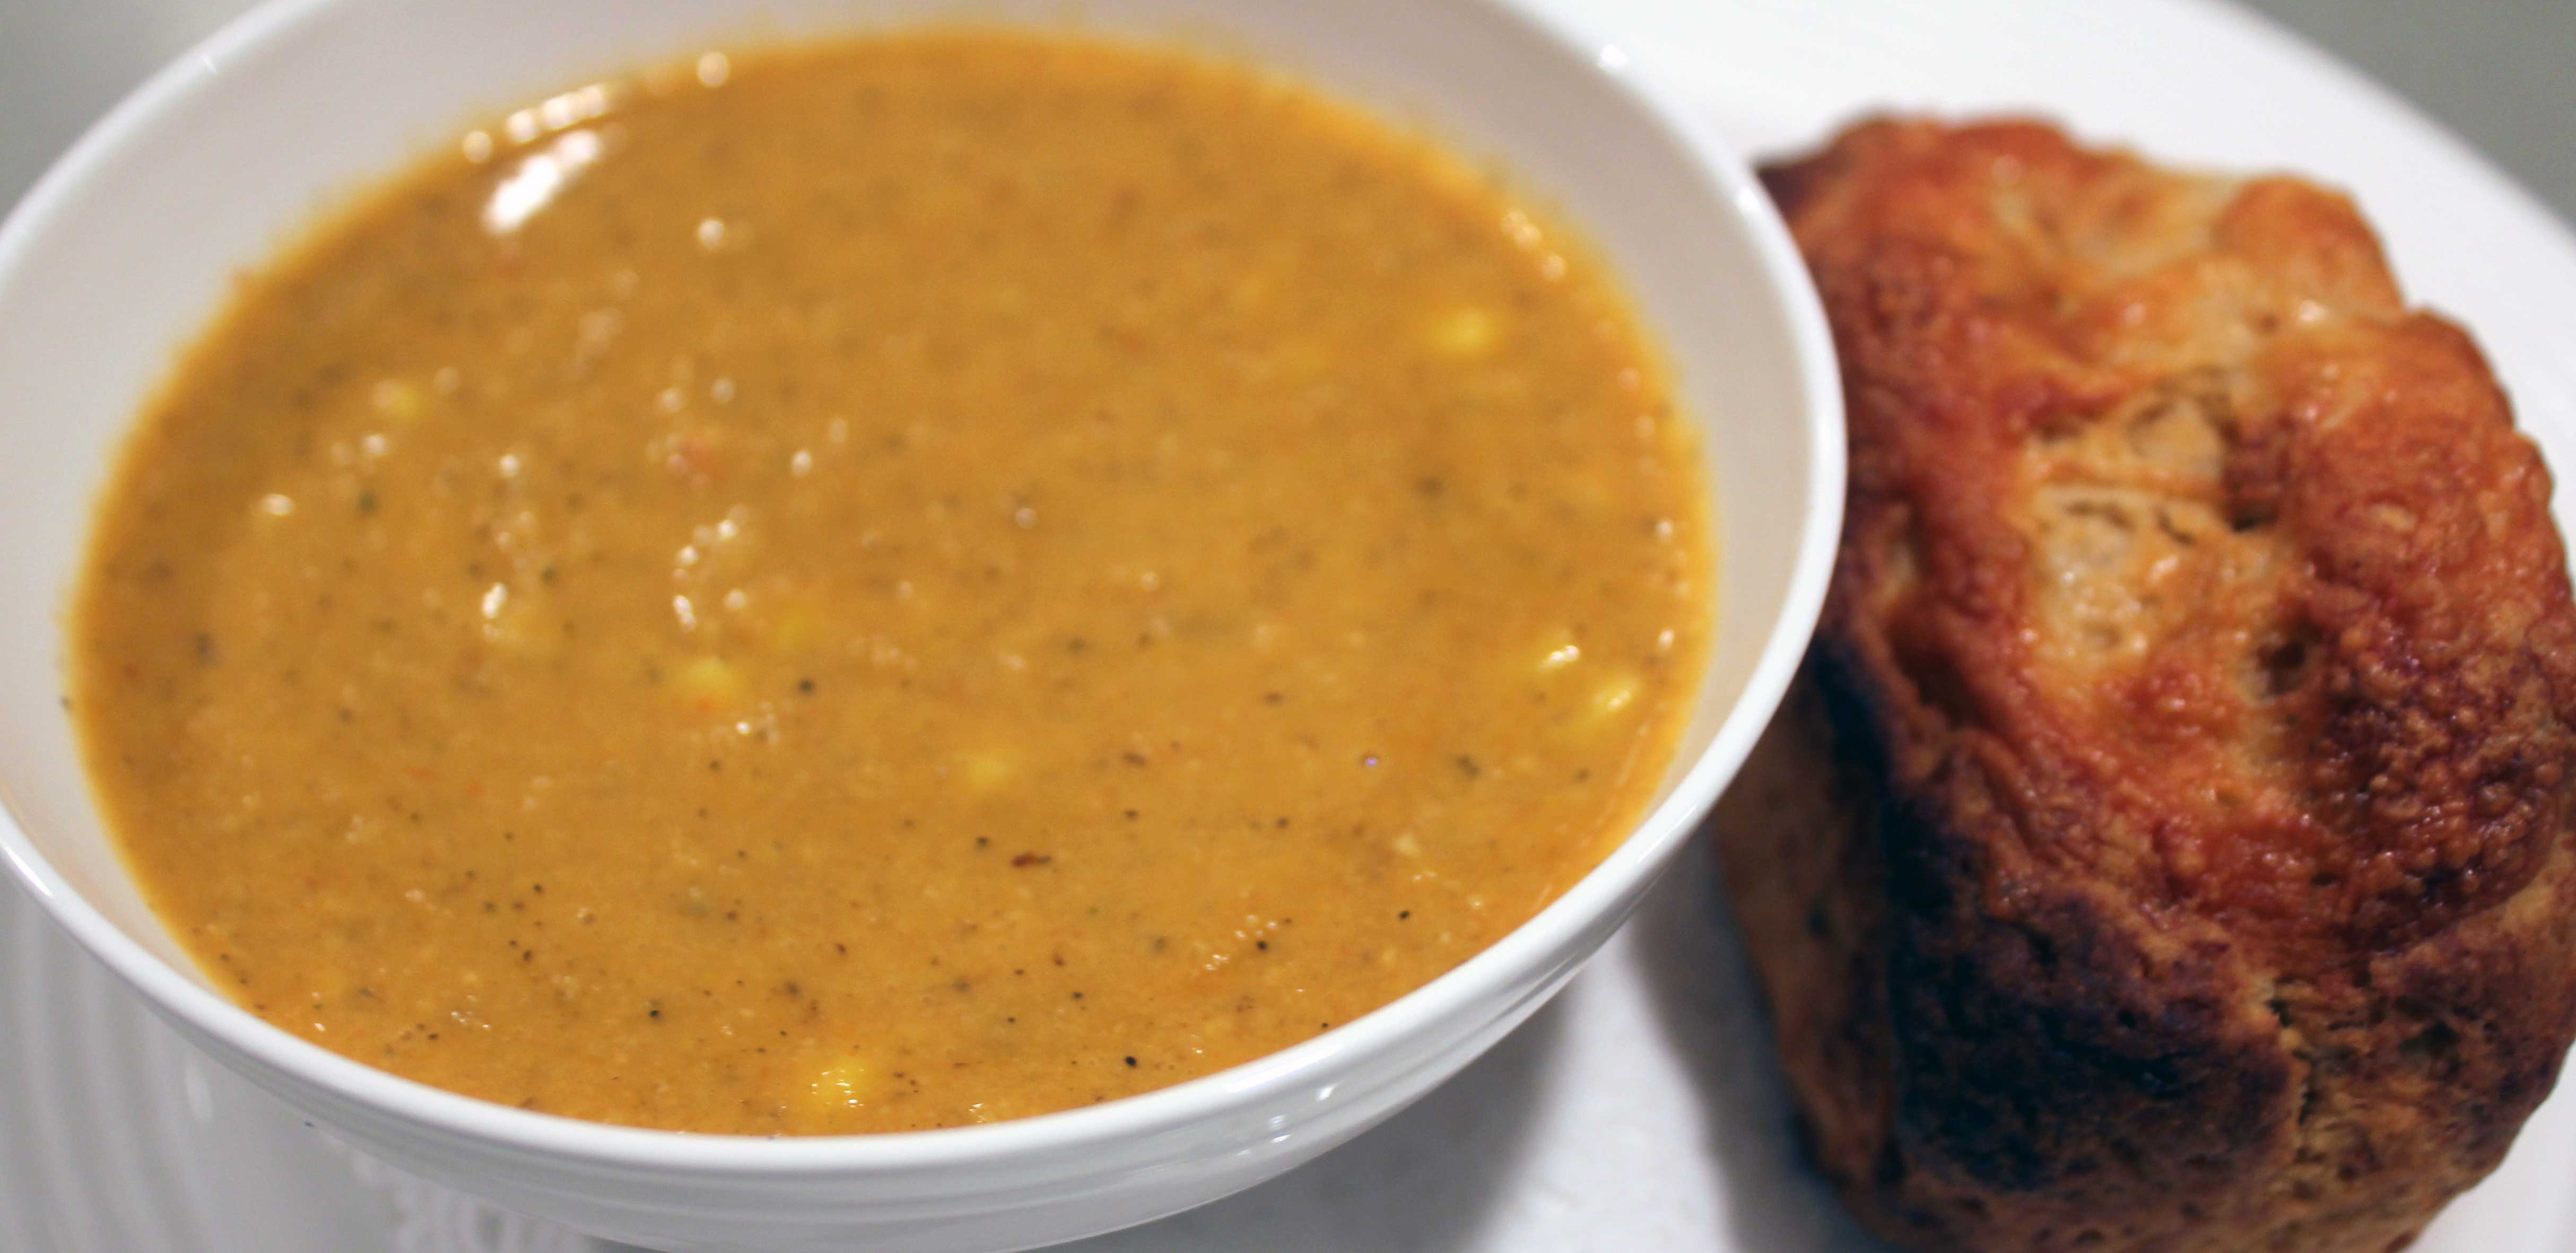 TBT Recipe: Smoky Roasted Corn Soup with Chipotle Chile